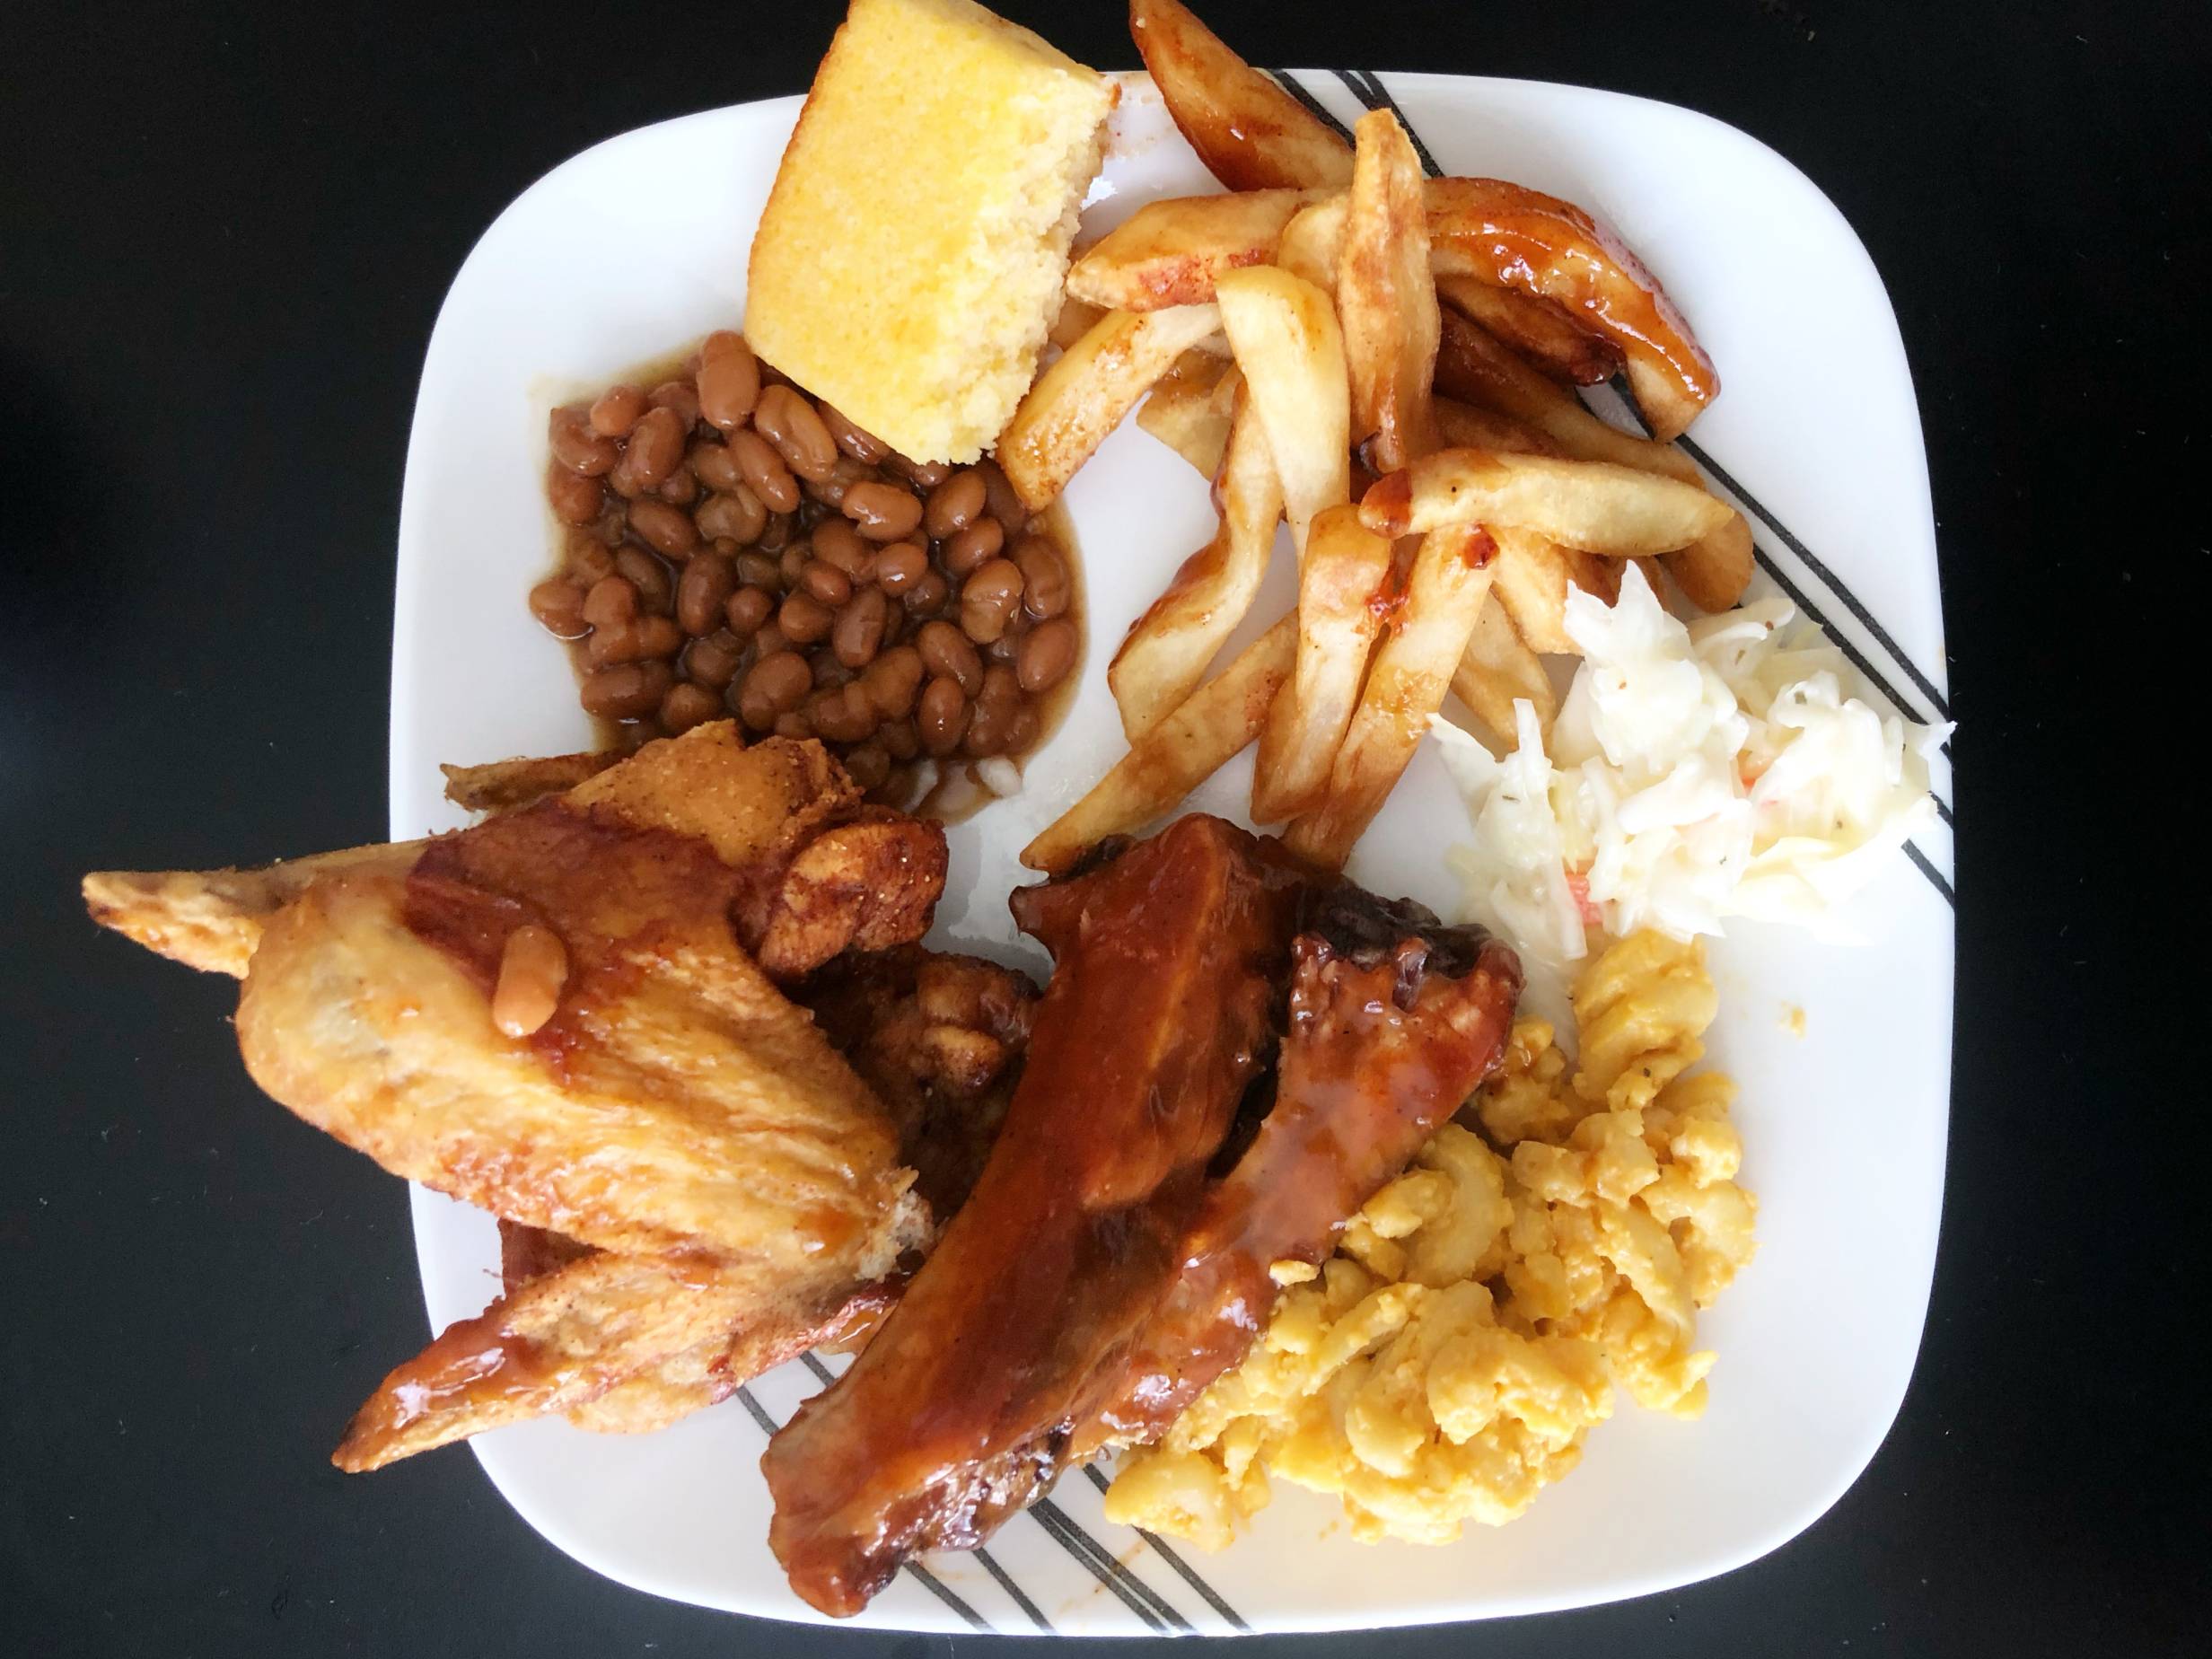 The author's plate from overhead showing wings, beans, cornbread, coleslaw, macaroni, and ribs on a white plate on a black table. Photo by Alyssa Buckley.